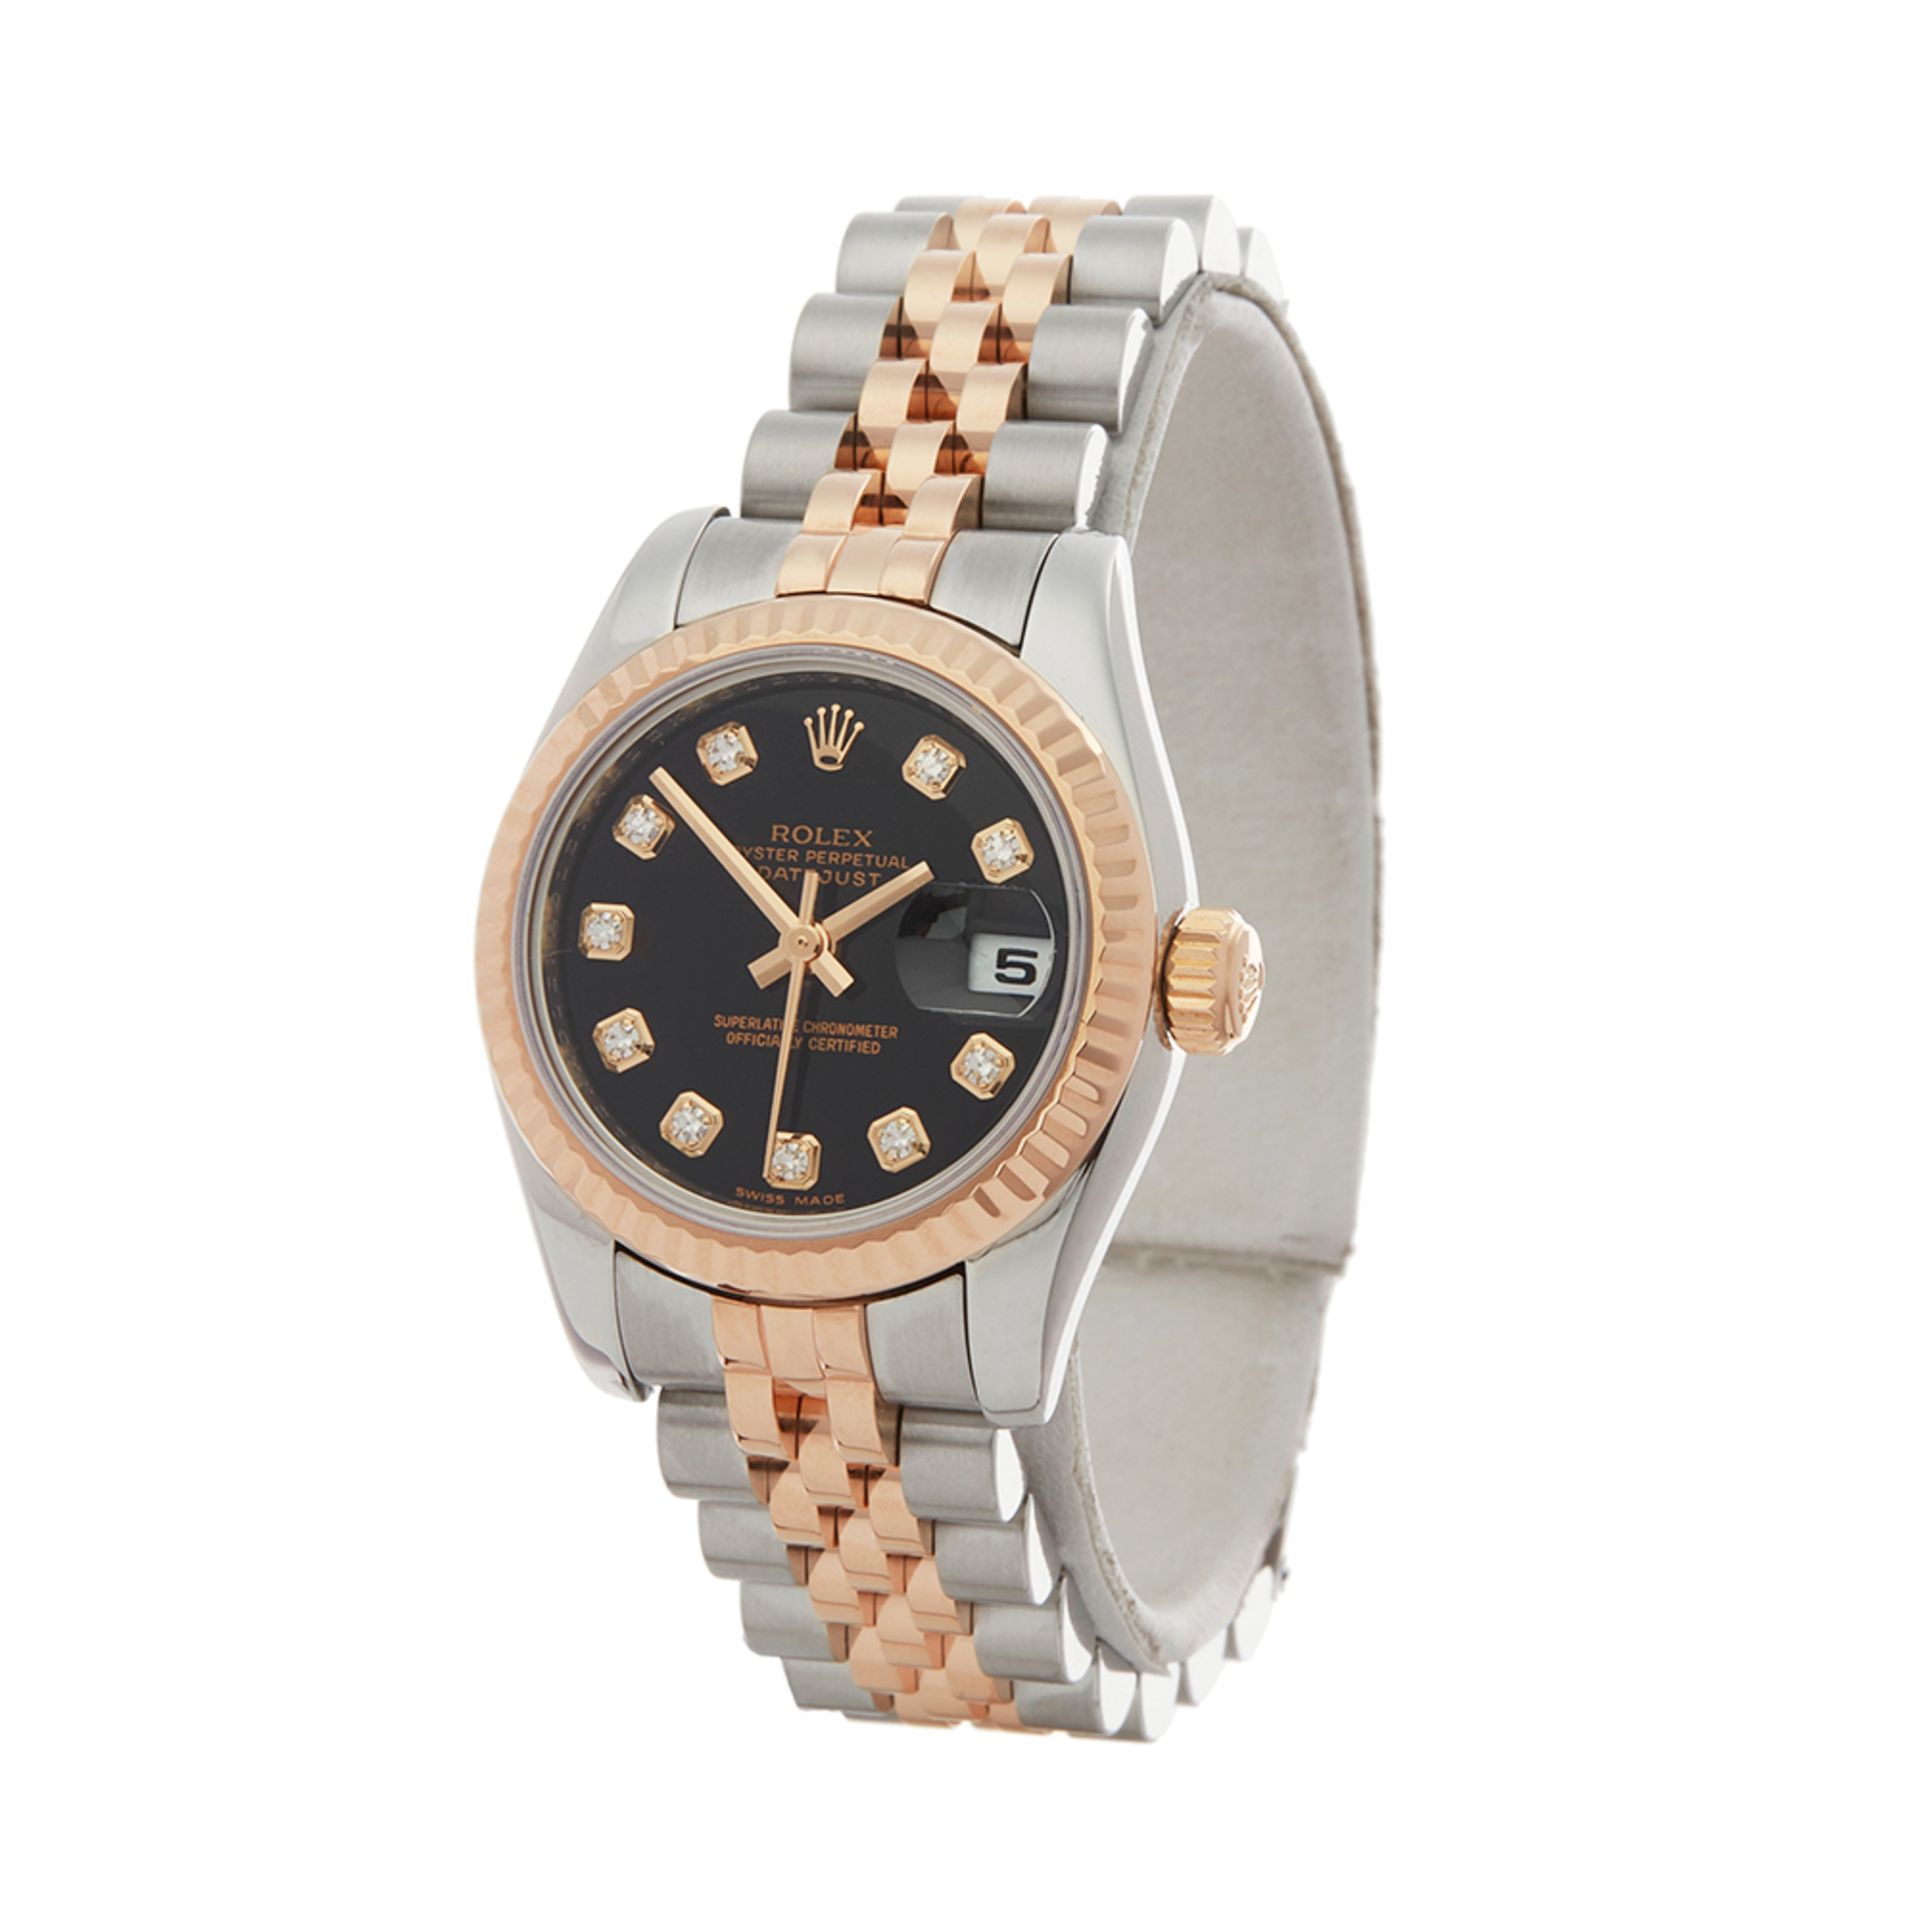 2009 Rolex Datejust 26 Stainless Steel & 18K Rose Gold - 197171 - Image 7 of 7